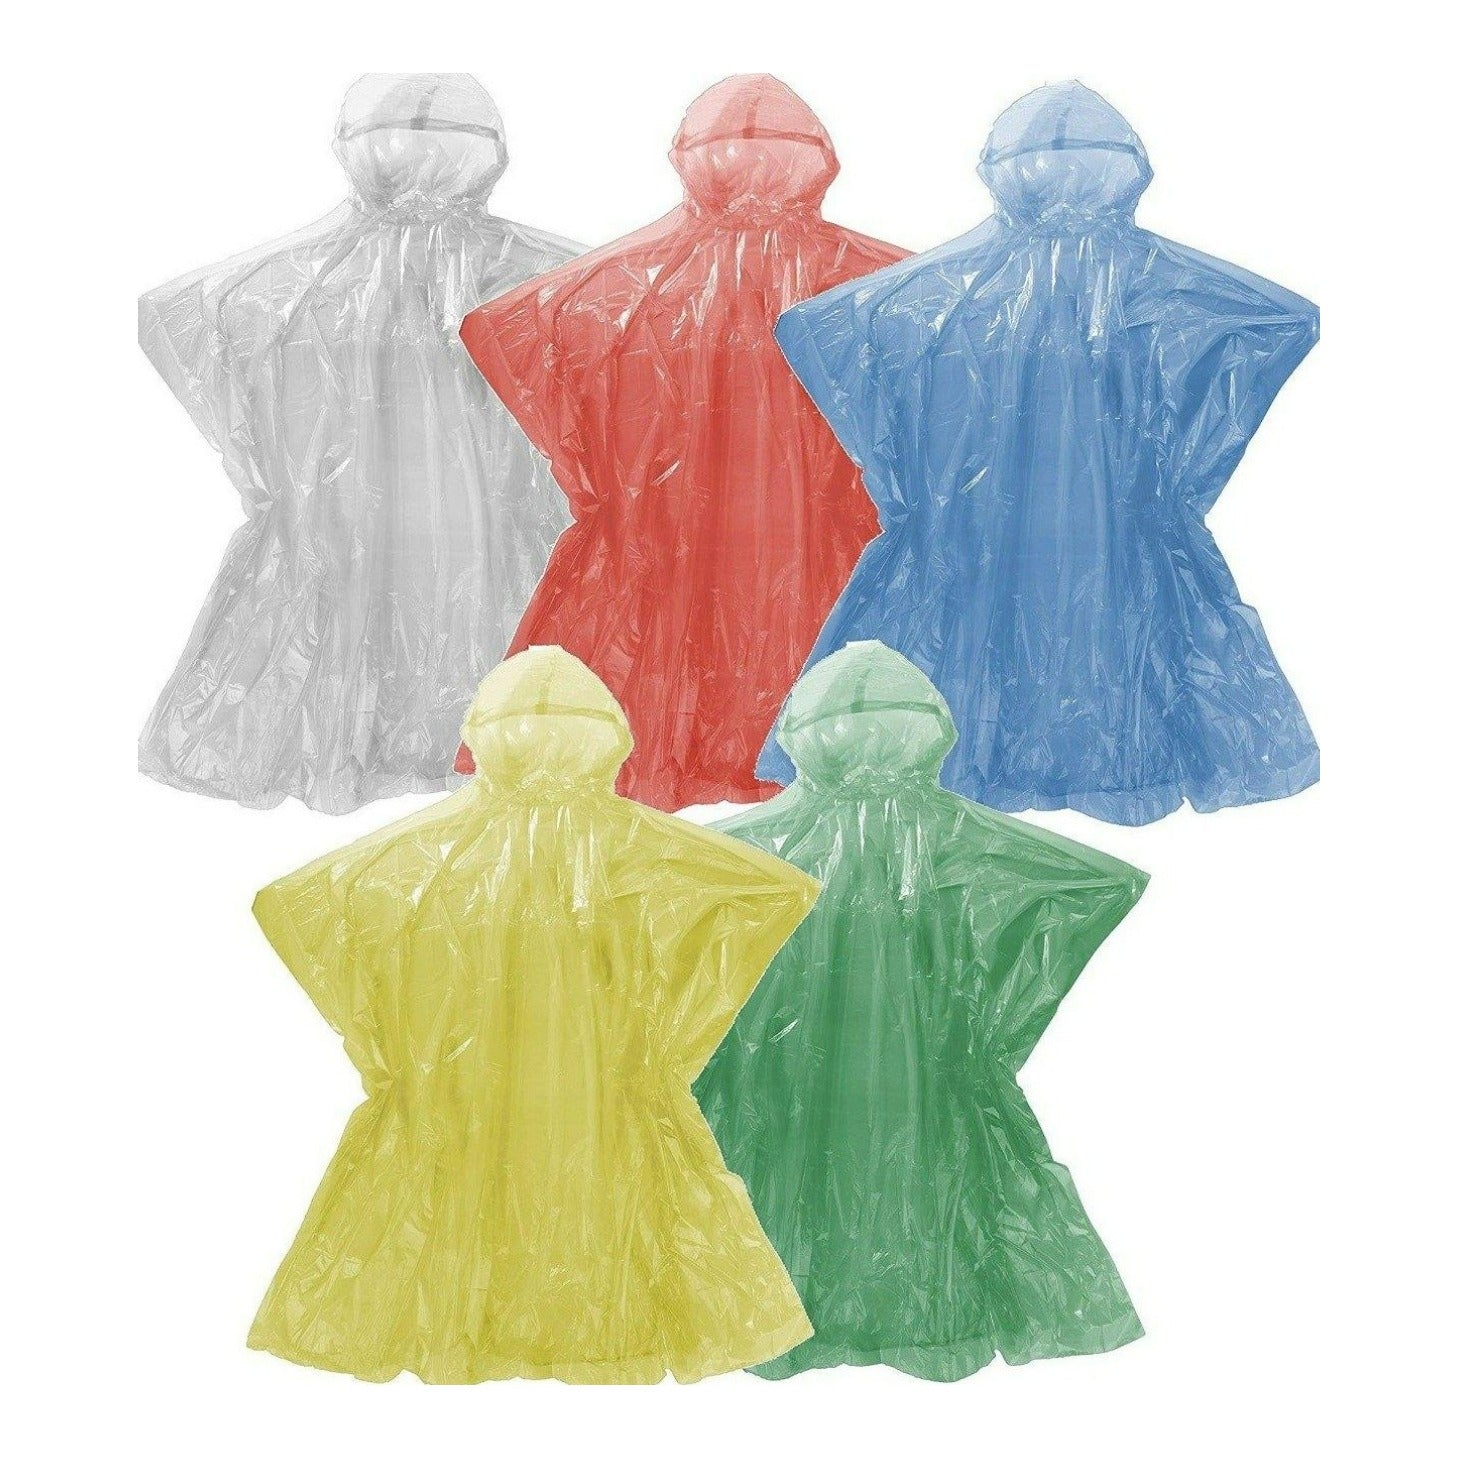 Disposable Waterproof Rain Ponchos for Adults Teens - Bulk Pack for Women  Men Emergency Raincoat Big Groups Theme Parks Camping Outdoors